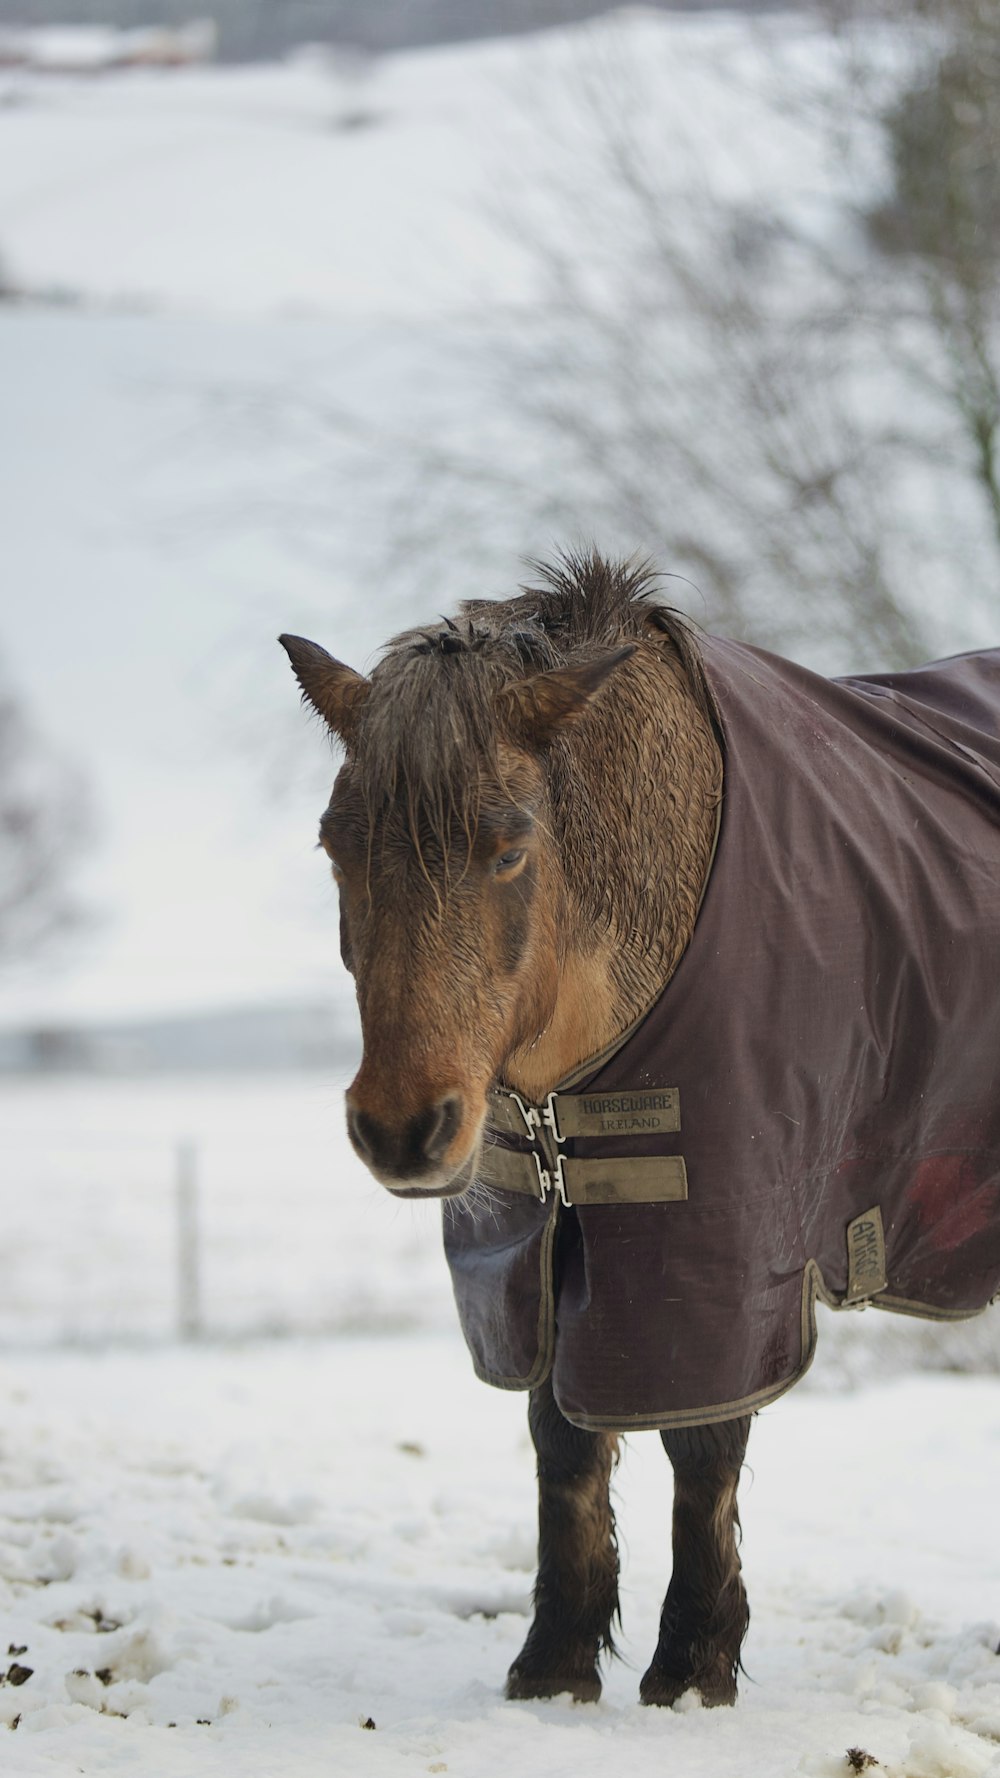 a small horse wearing a blanket in the snow